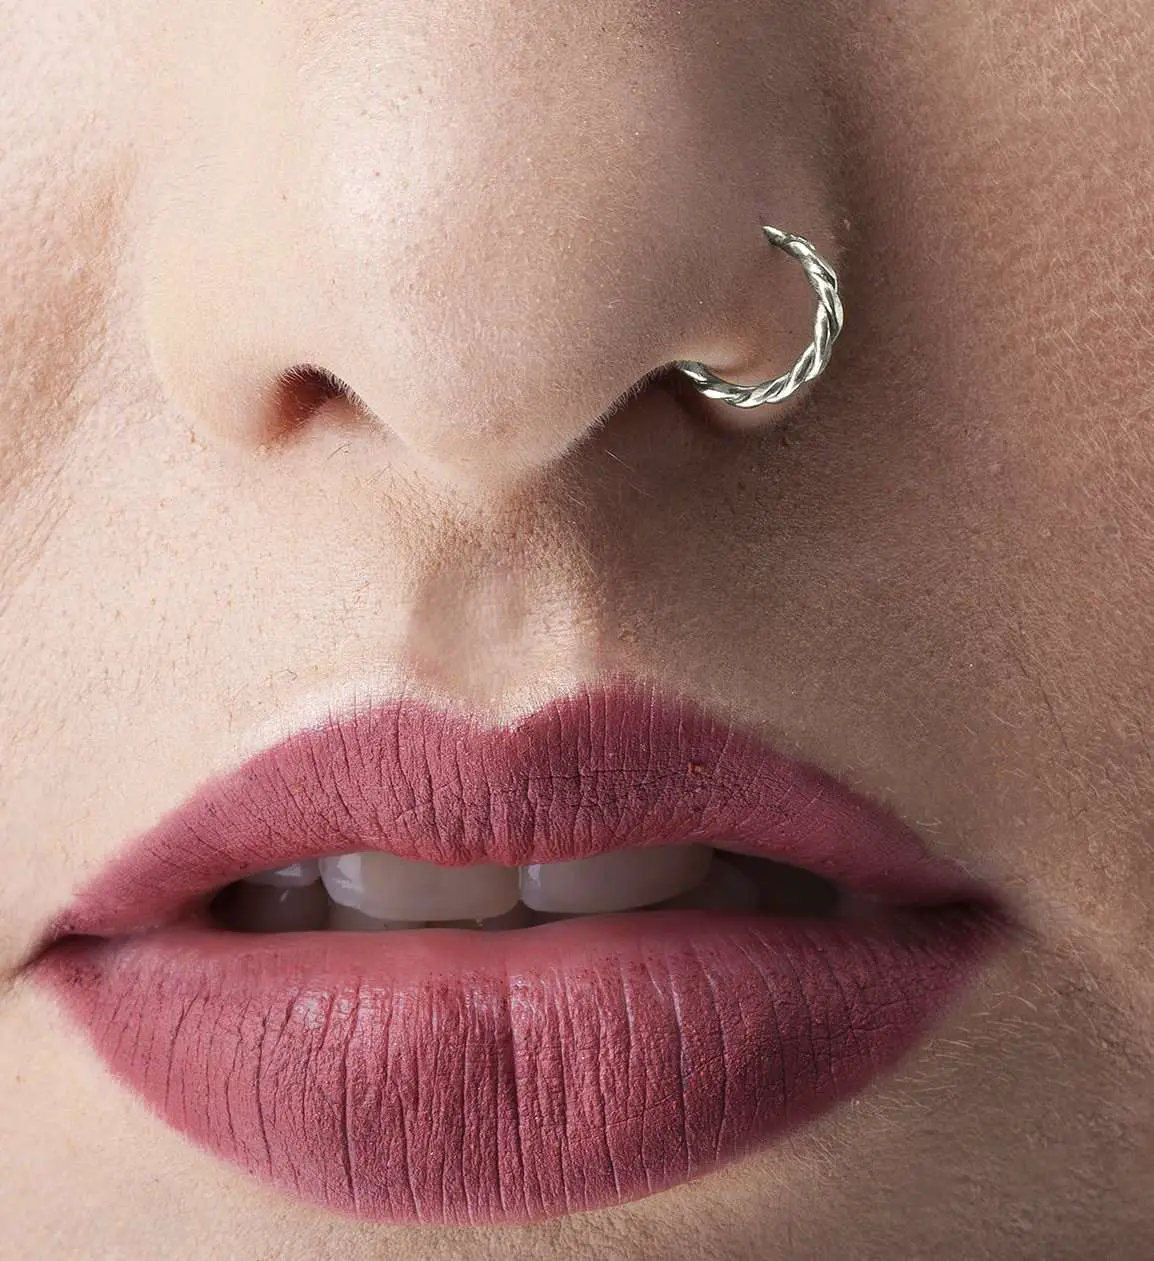 Nose Piercings Types, How To Clean, Care, And New Jewelry Ideas